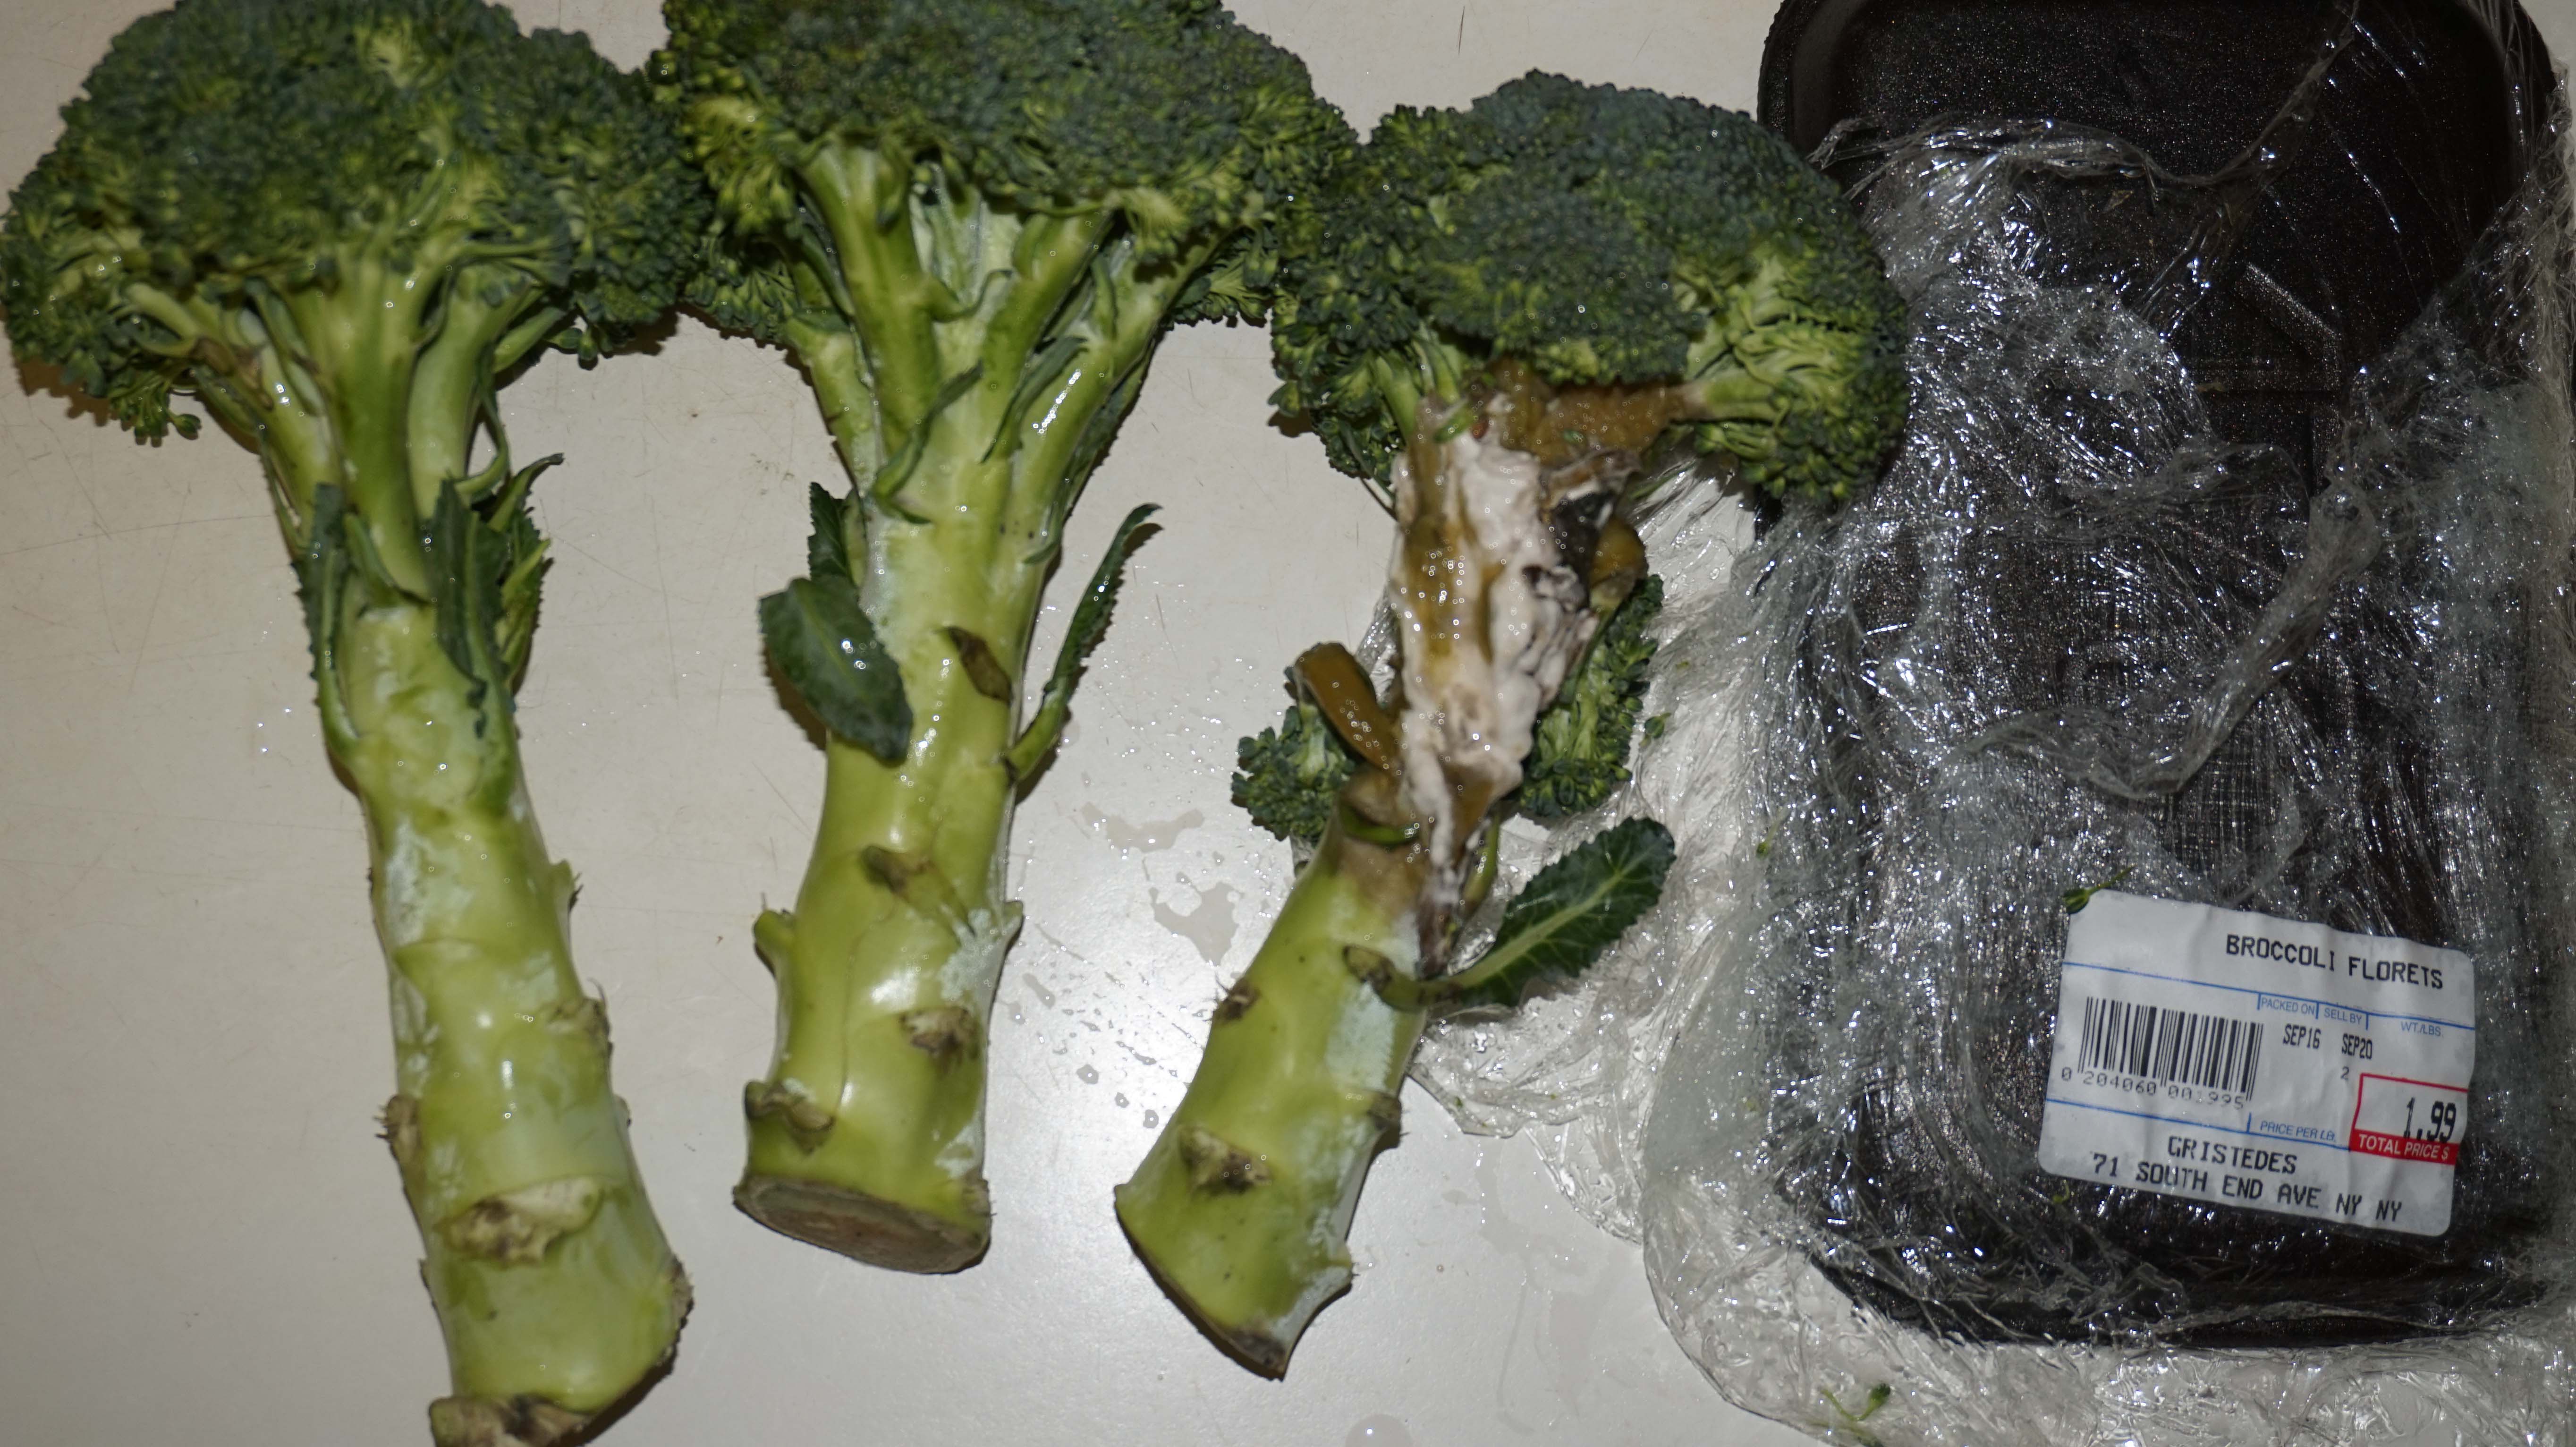 Moldy Gristedes broccoli 9-22-2014 low